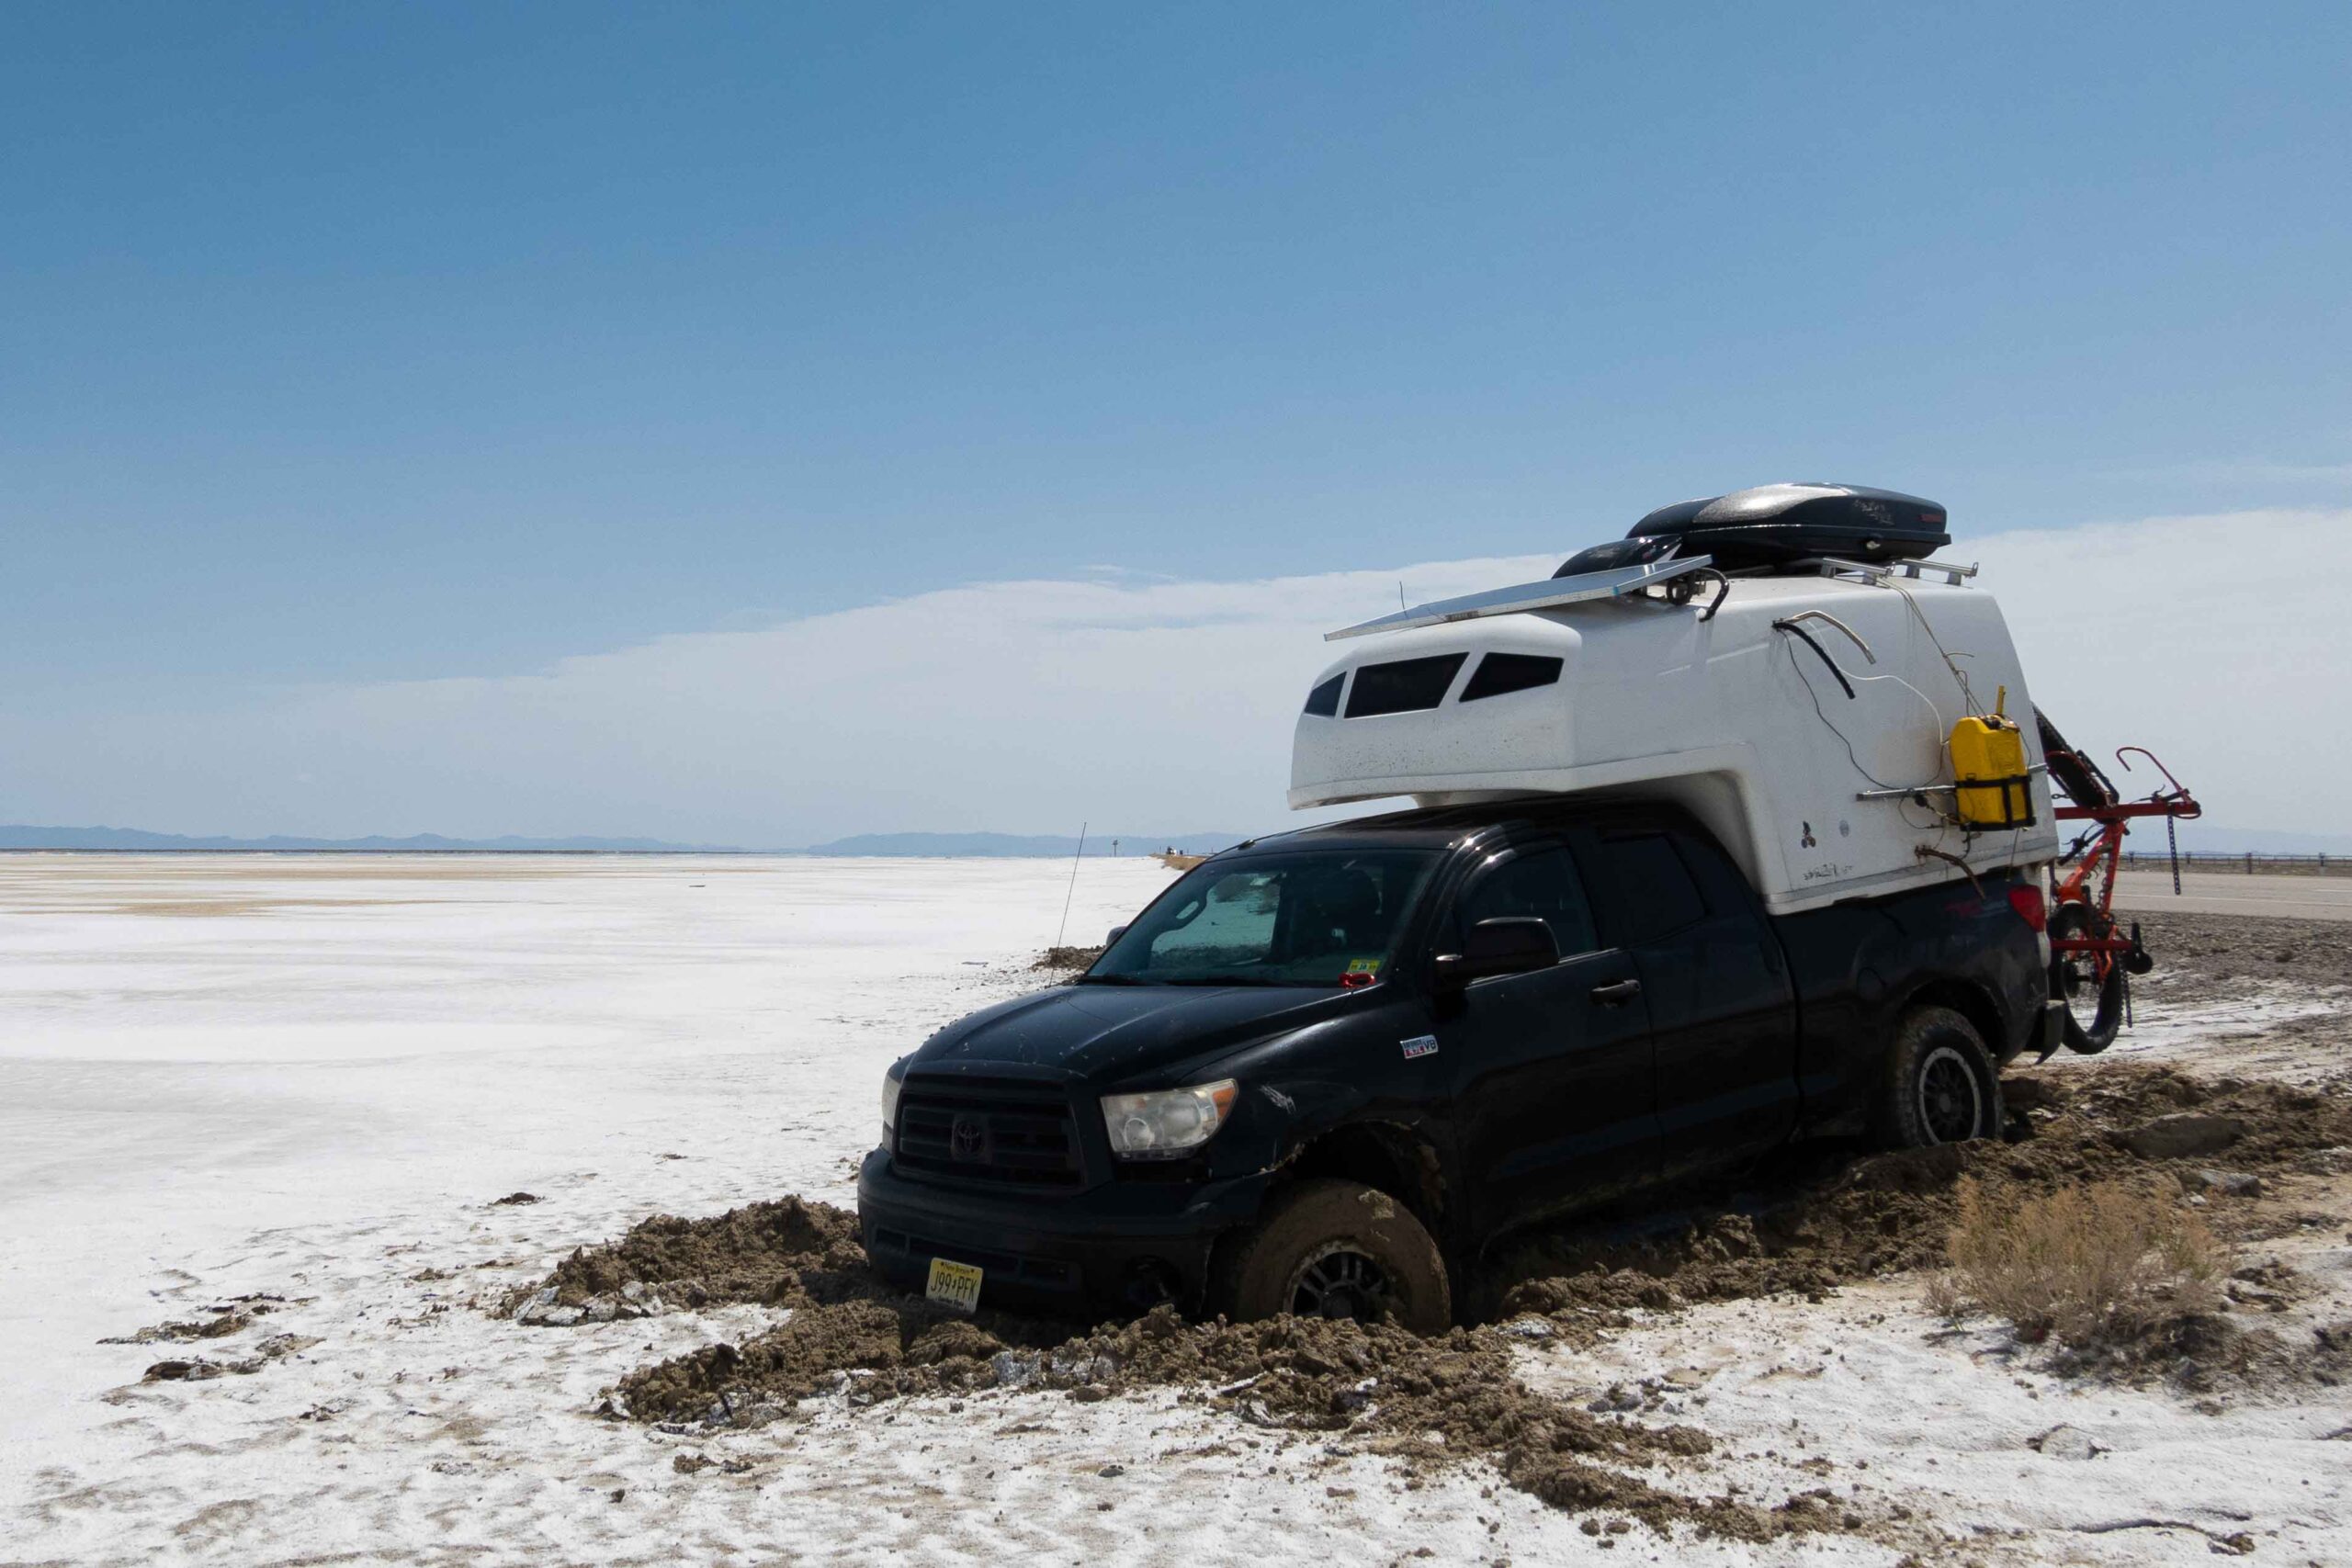 How to Recover Your Vehicle from Mud, Snow or Sand